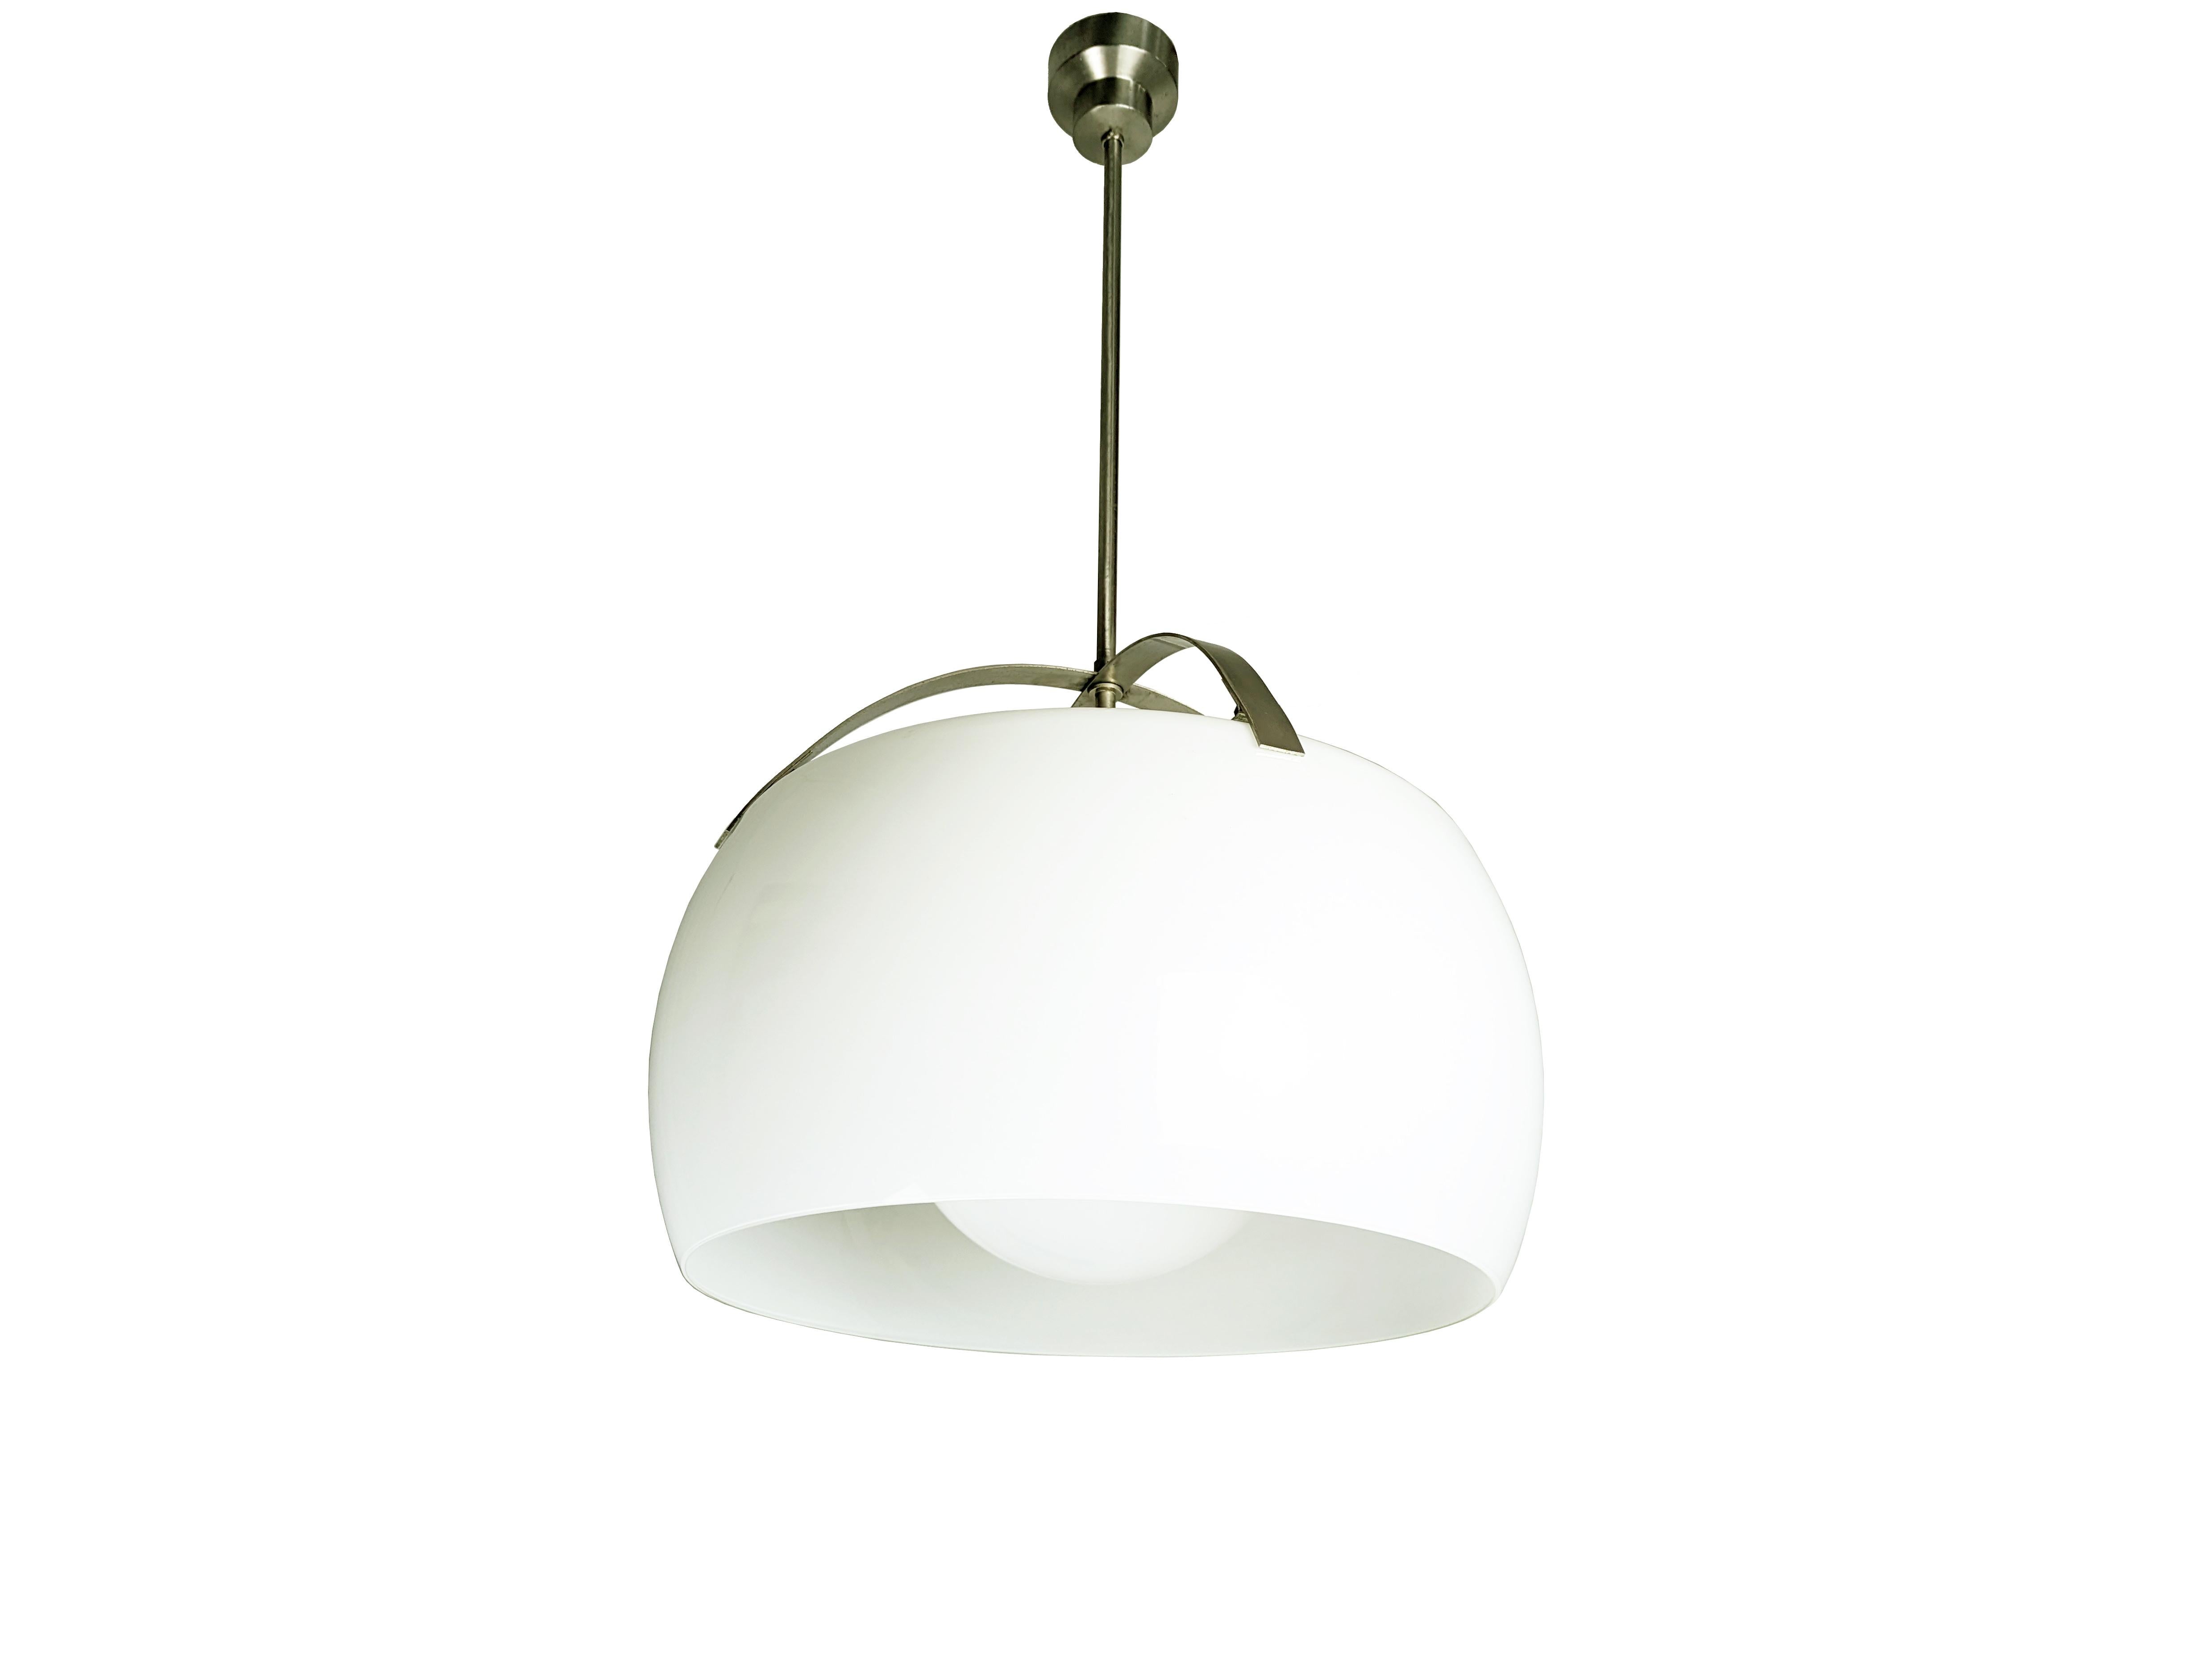 This elegant pendant was designed in the 1960s by Vico Magistretti for Artemide.
It is made from a nickel-plated brass structure with 2 opaline glass shades. Its electrical system features 1 light holder (E27/large incandescent bulb). The lamp